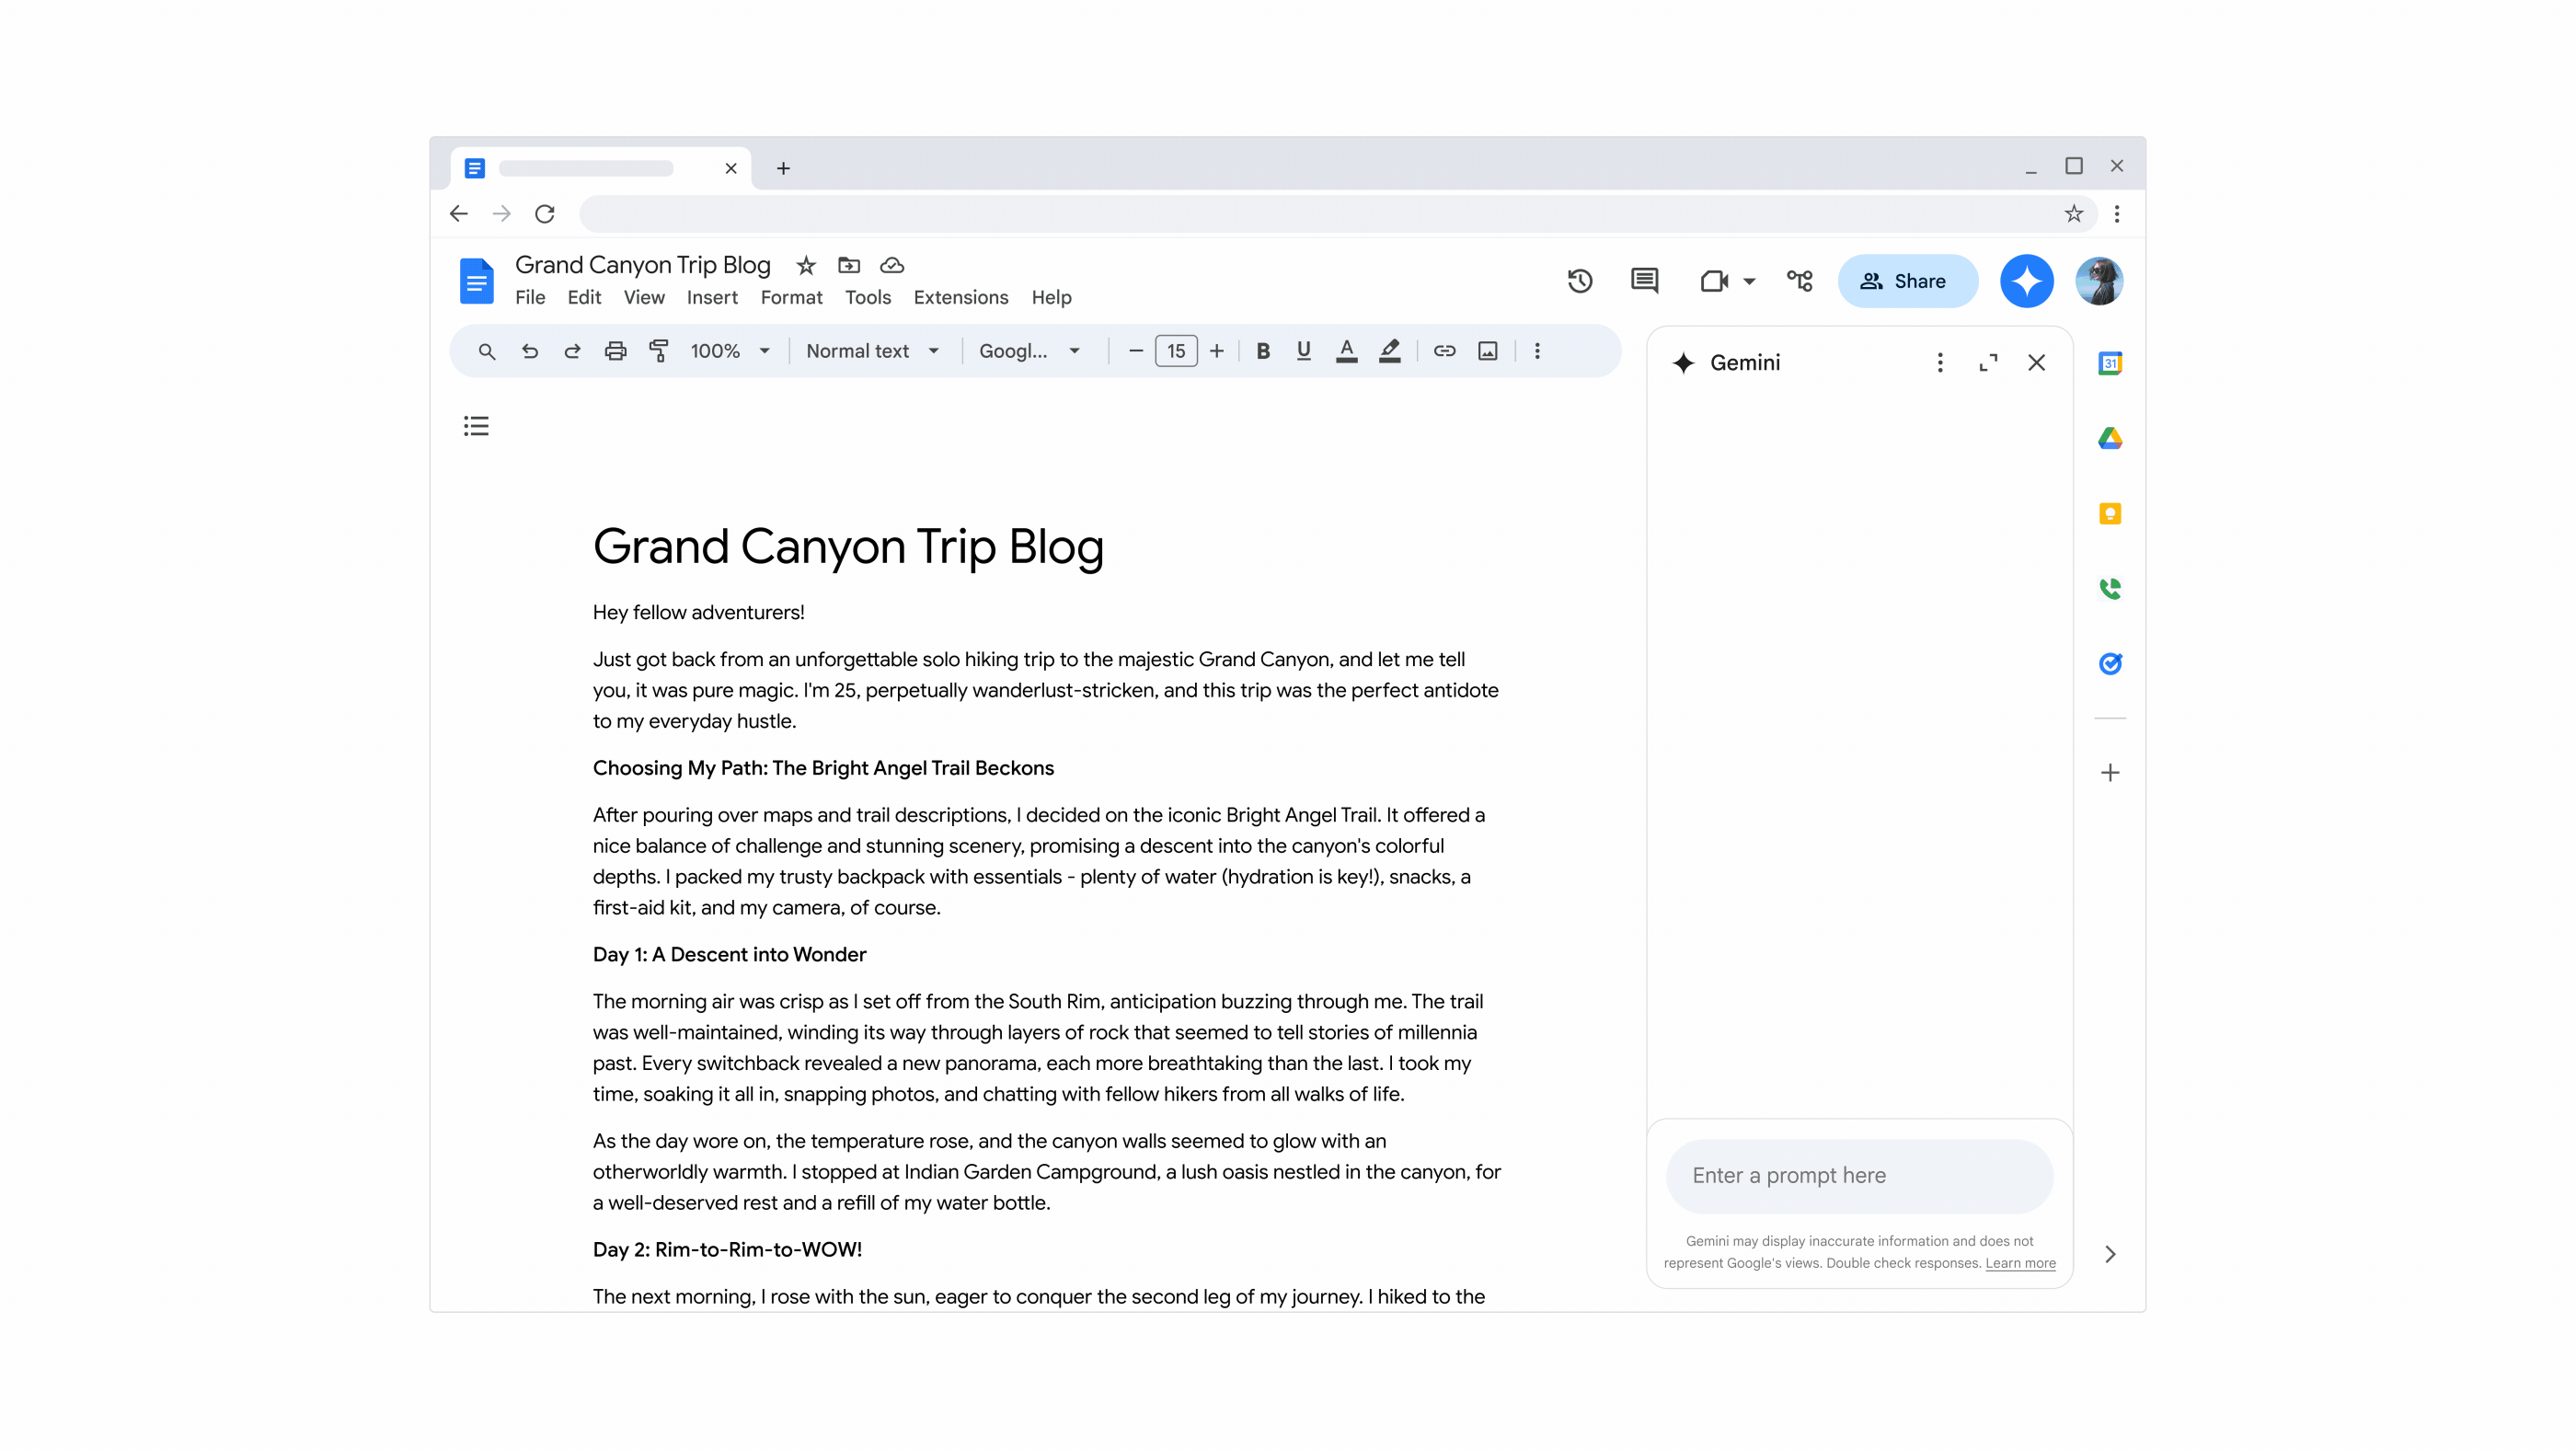 Gemini in Docs side panel providing a summary and suggested prompts